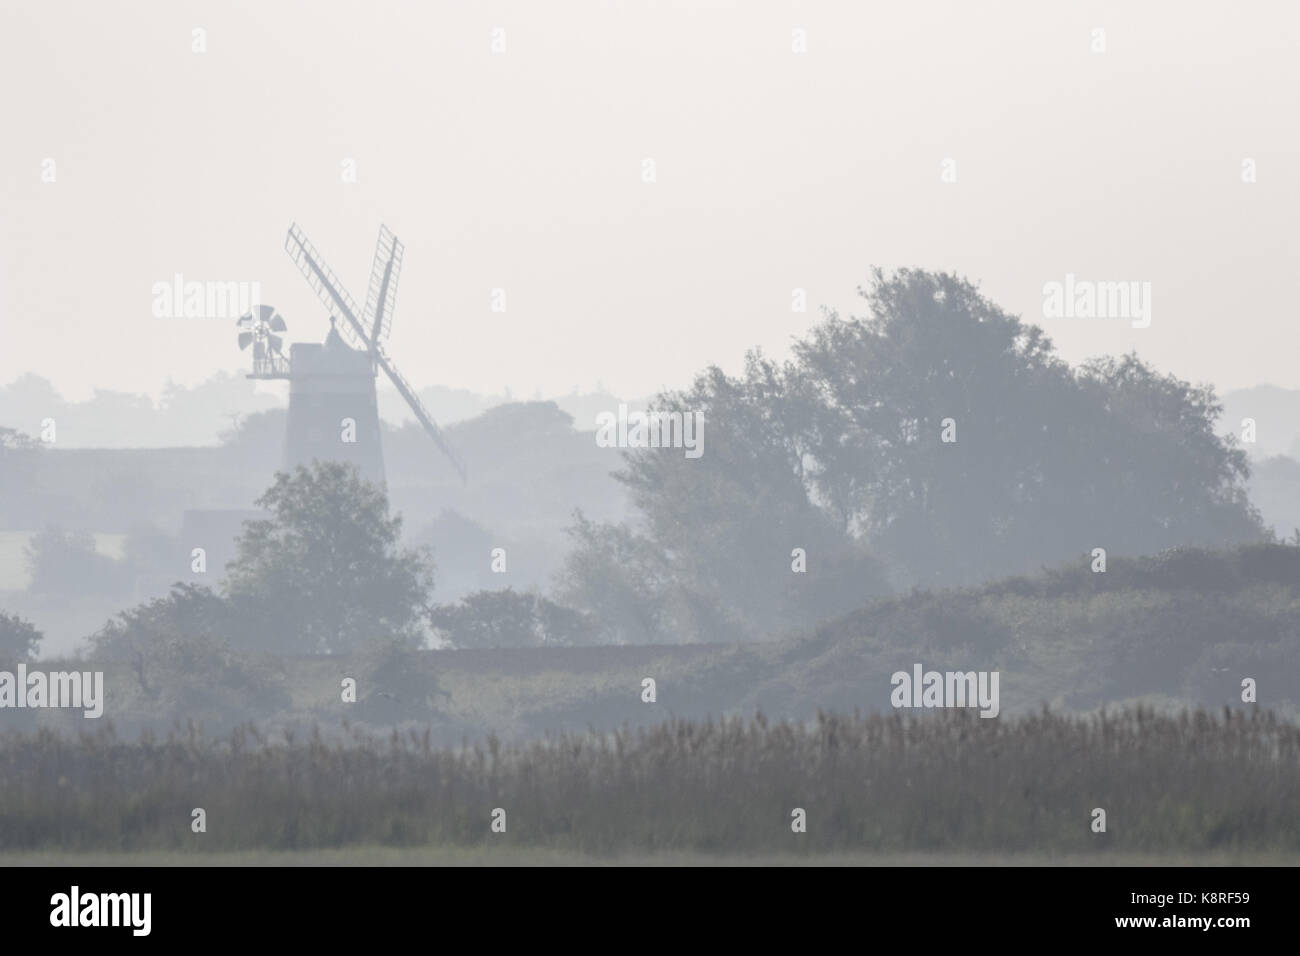 Early morning view of Burnham Overy Staithe Windmill, it is  a Grade II* listed building tower mill at Burnham Overy Staithe, Norfolk Stock Photo